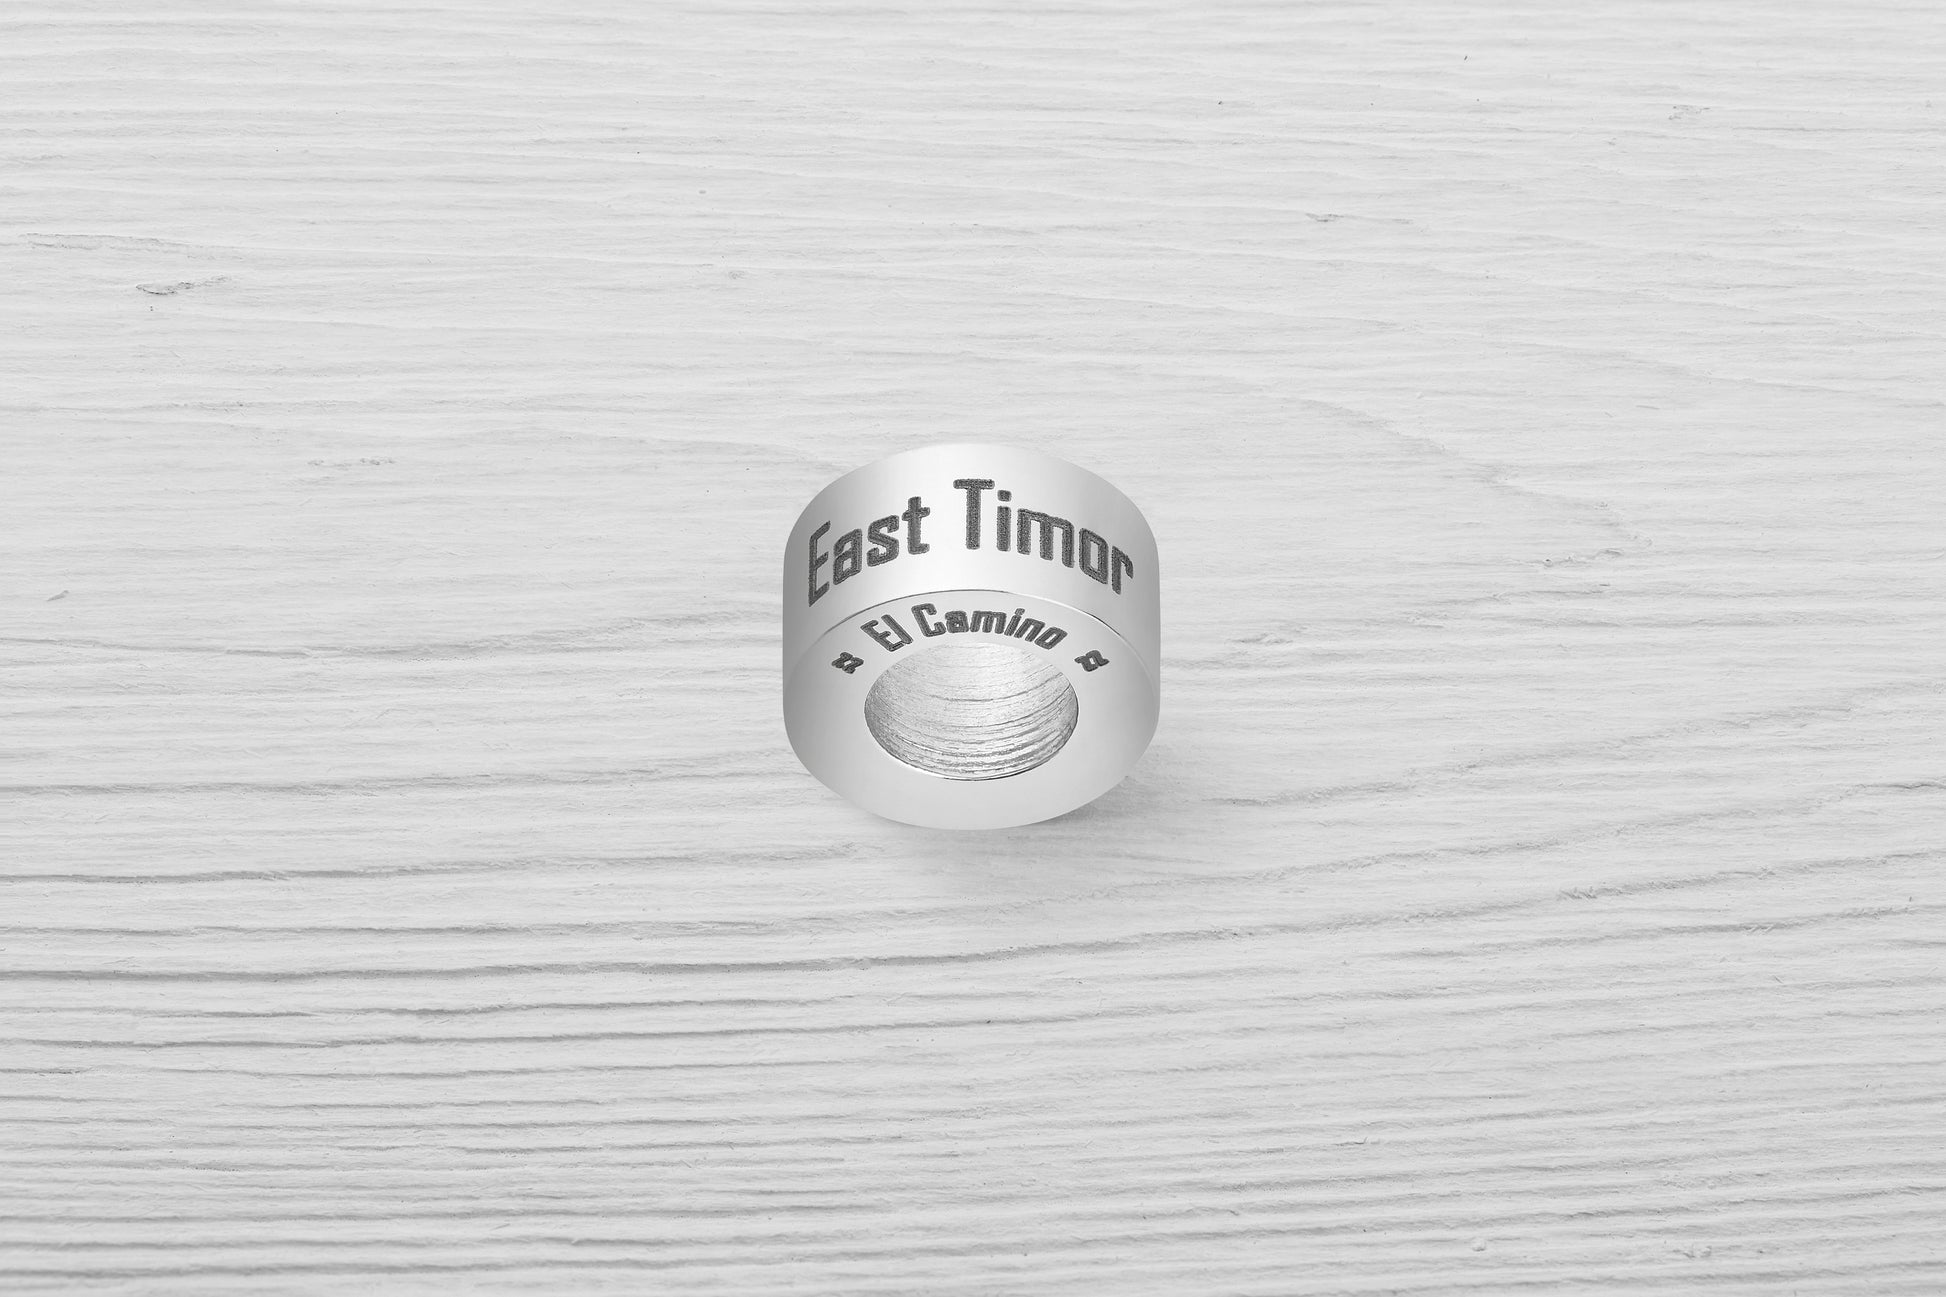 El Camino East Timor Country Step Travel Charm Bead